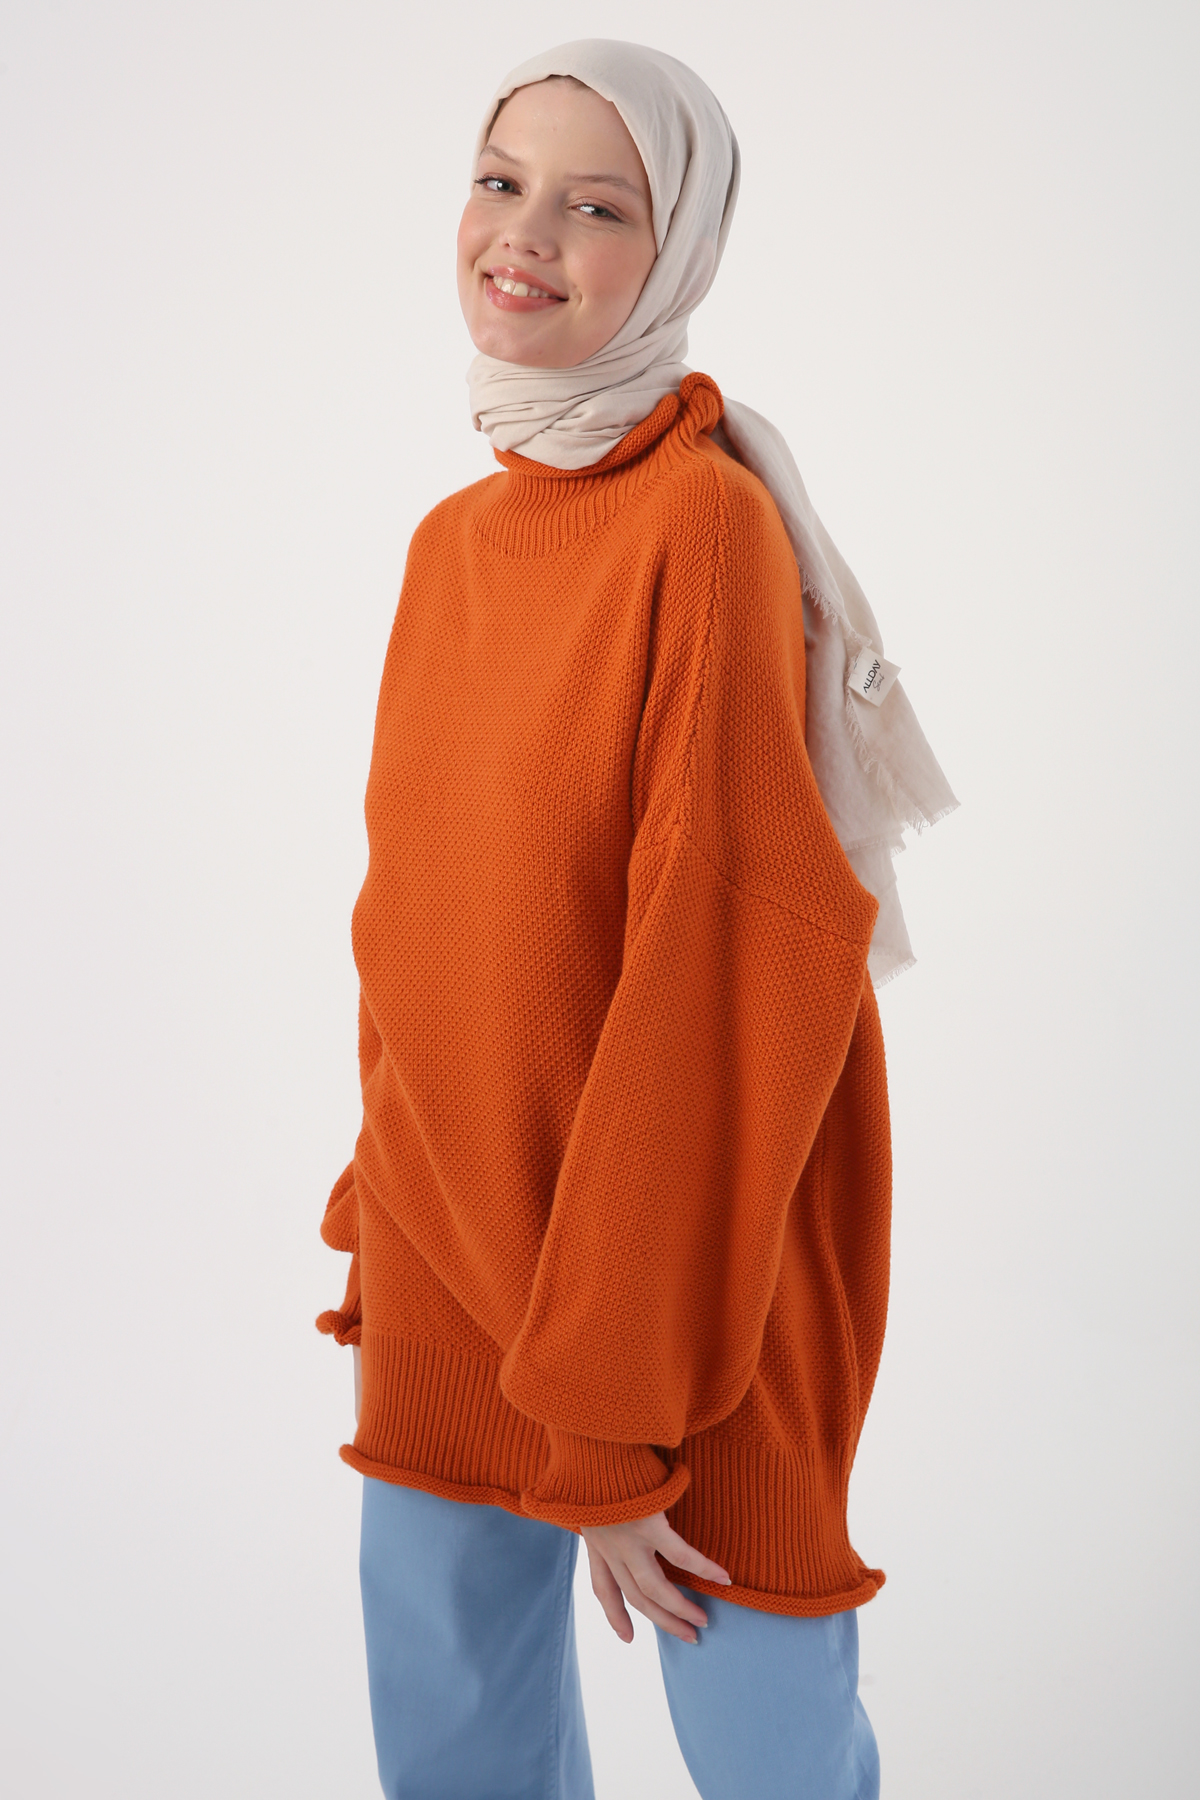 Corrugated Neck And Sleeve Detail Oversize Knitwear Pullover